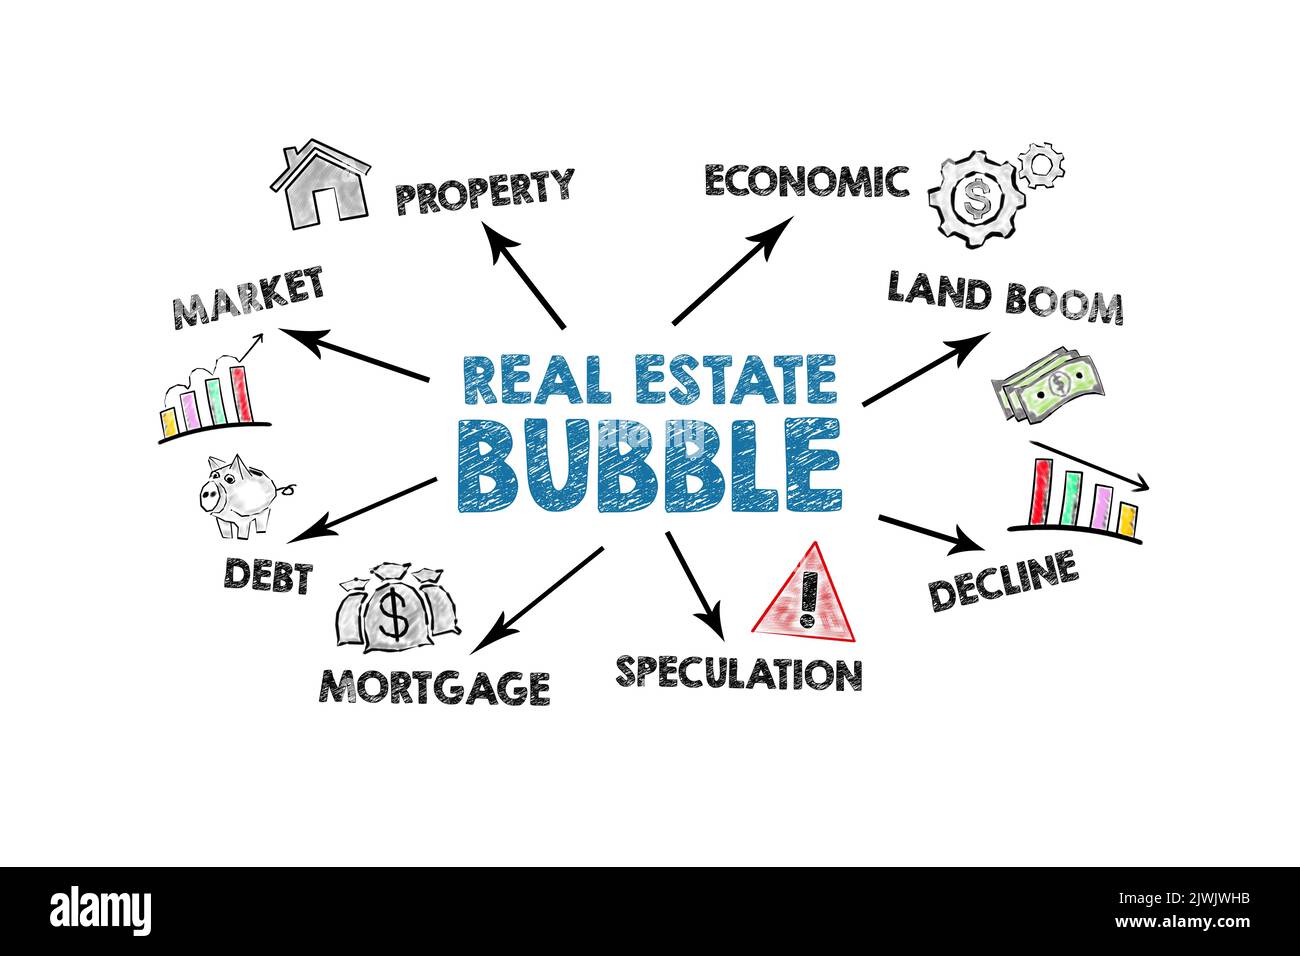 Real estate bubble. Illustration with keywords, icons and arrows on a white background. Stock Photo